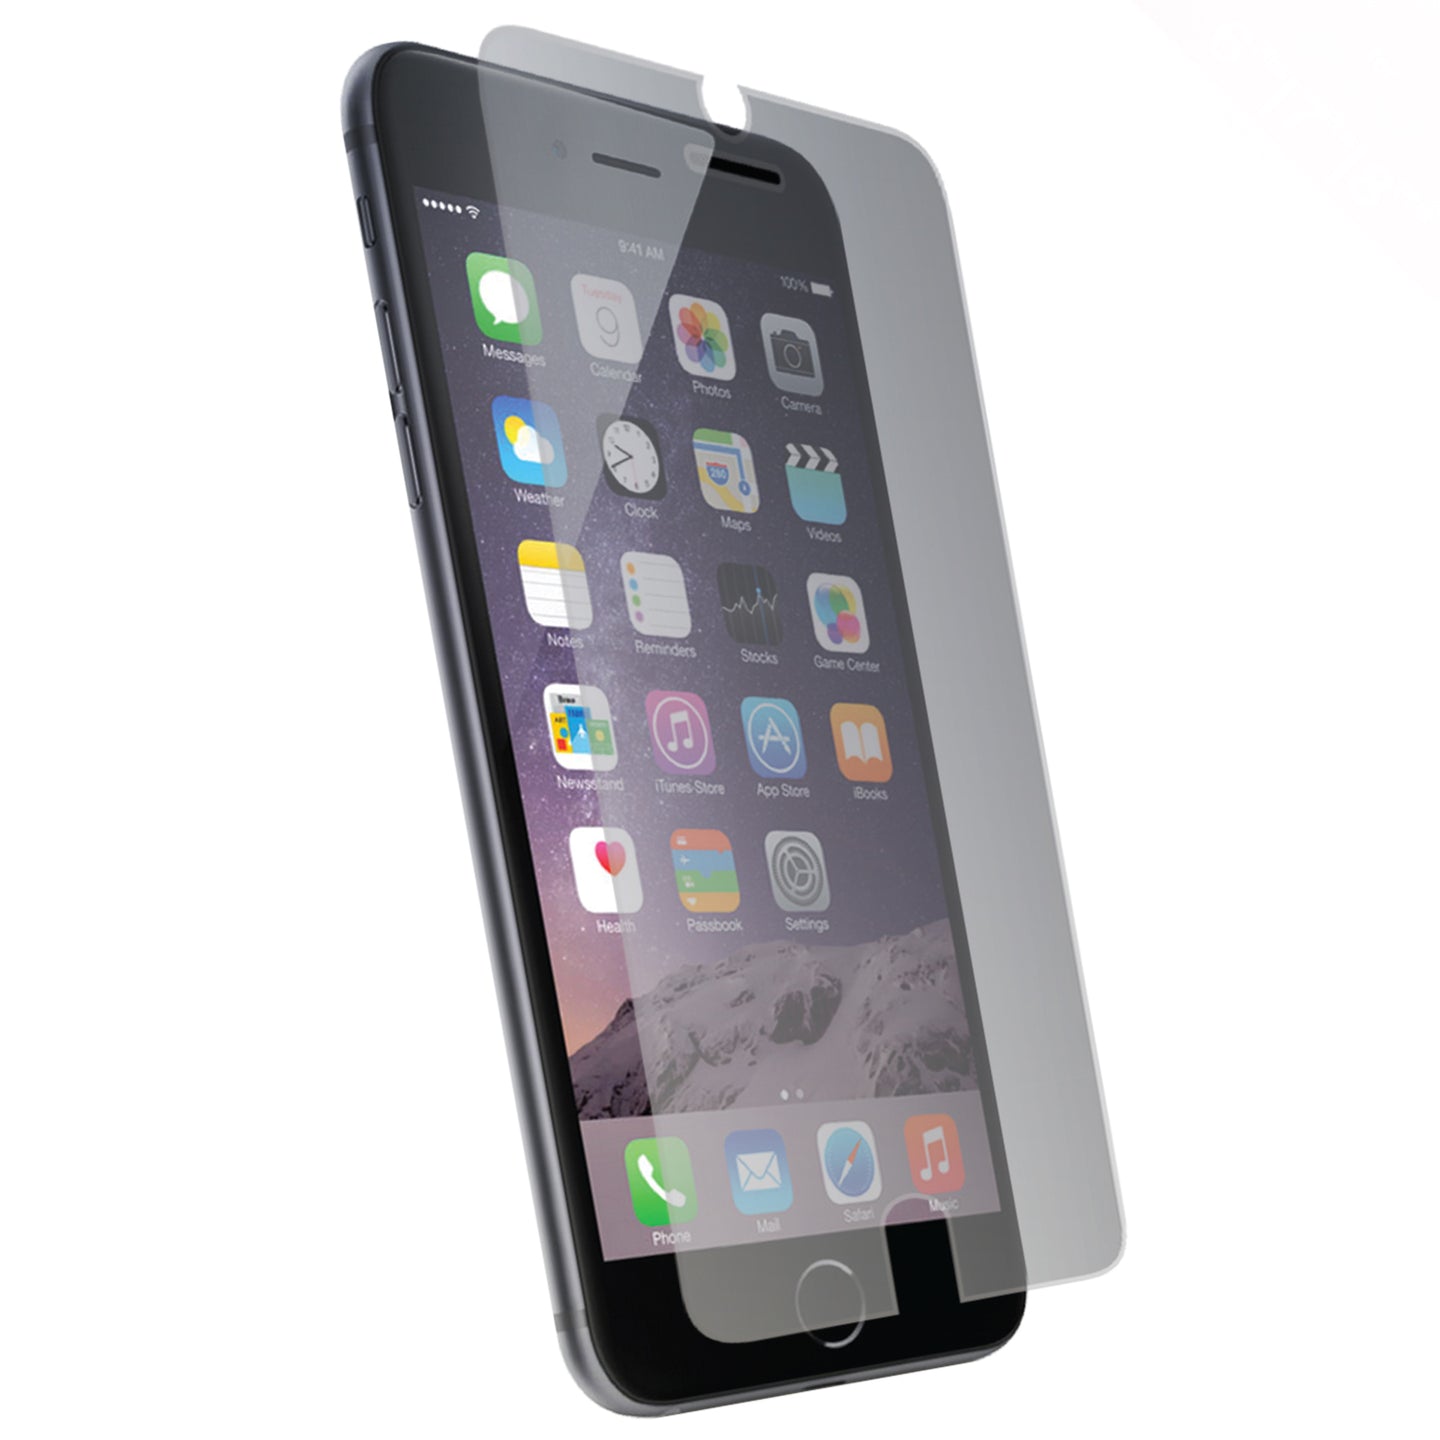 iHip iPhone 6+,7+,8+ Tempered Glass Screen Protector, Anti Scratch, Bubble Free, Shatter-Proof and HD clarity - iHip